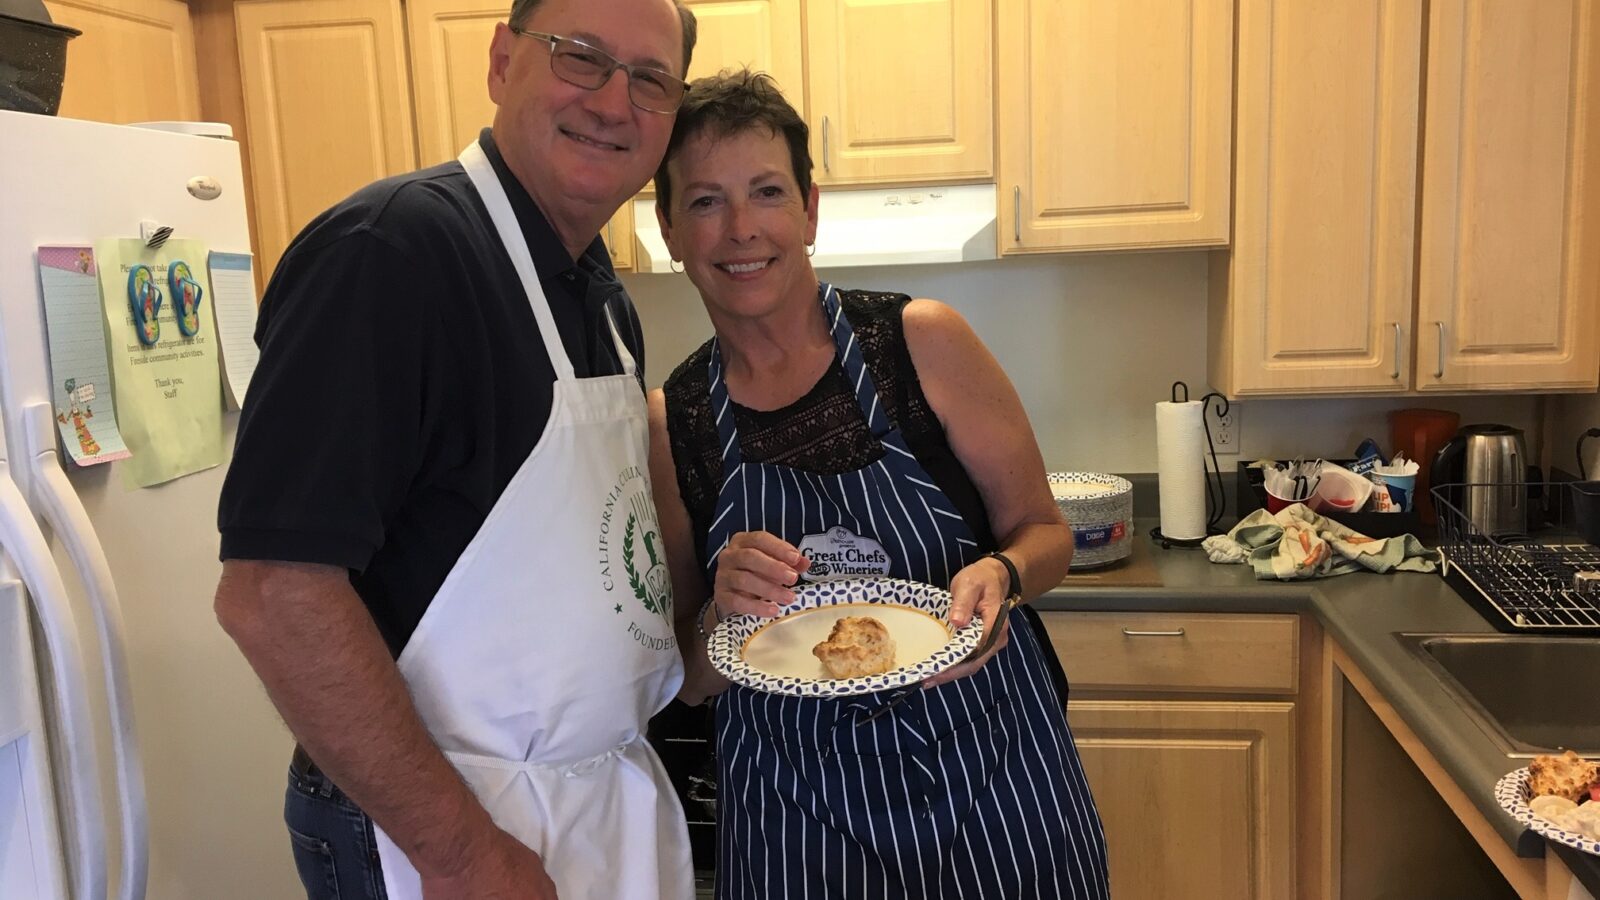 Sharon and Jim smiling in the kitchen